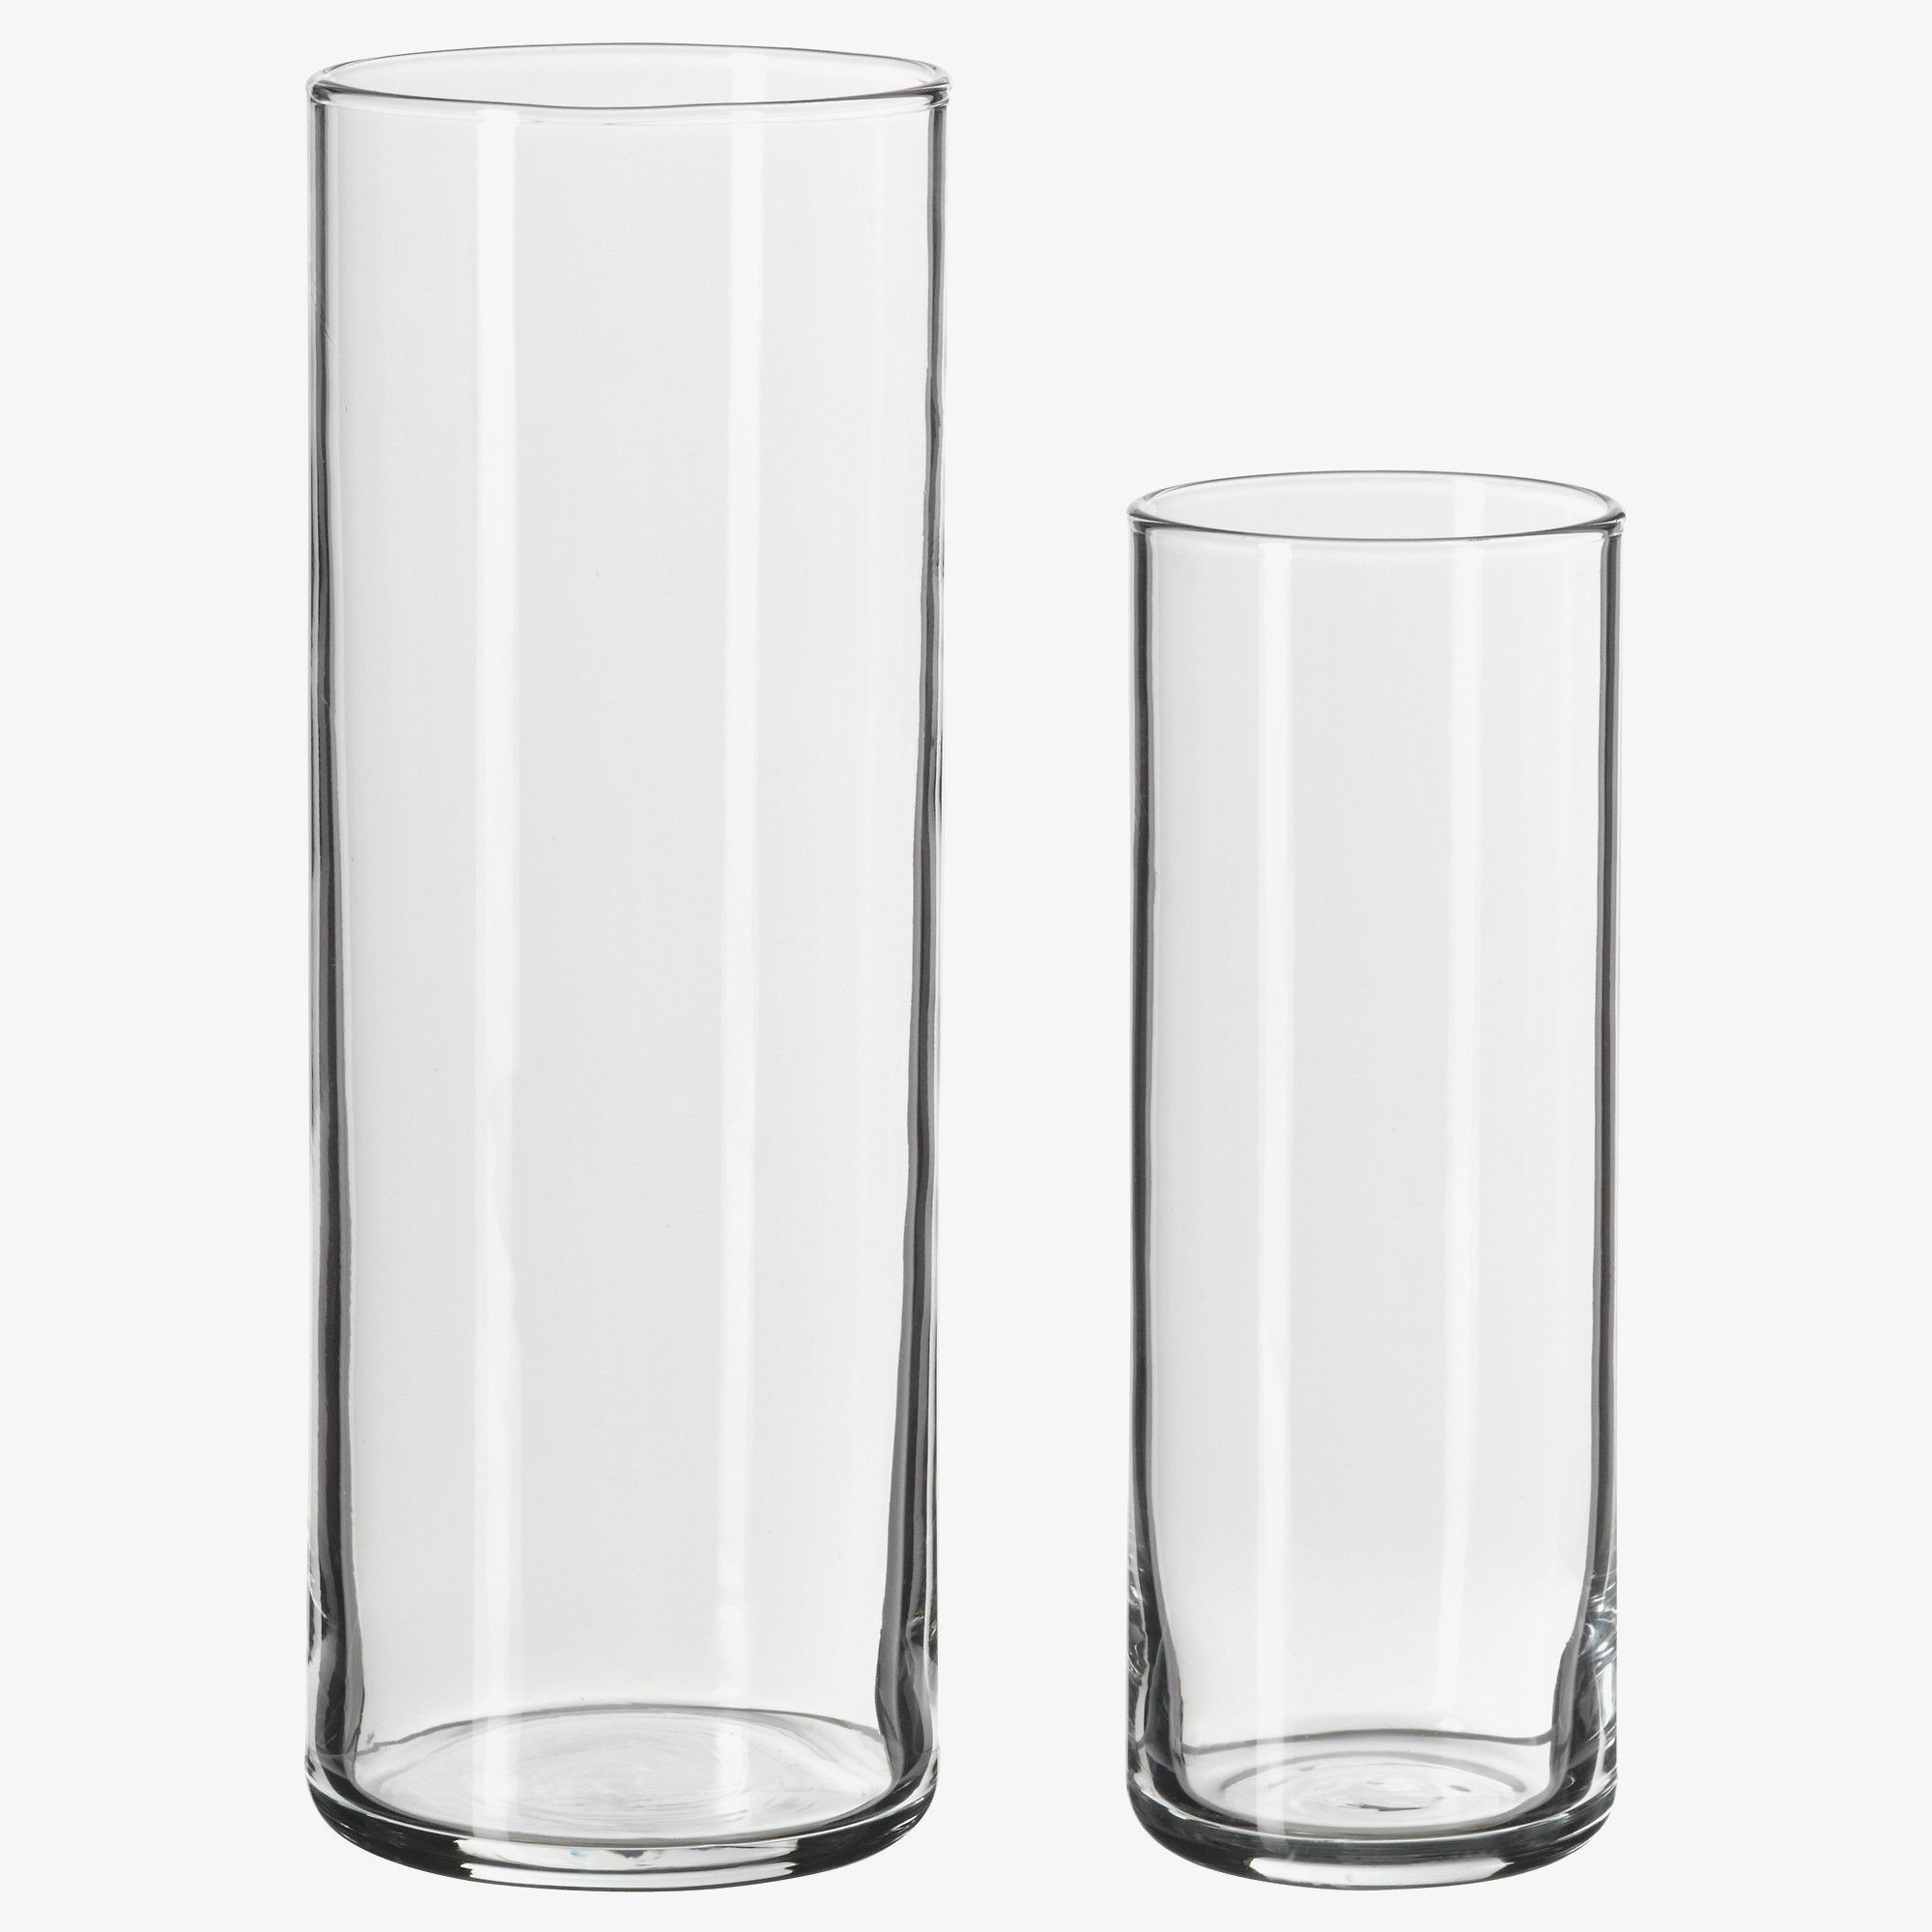 24 Amazing 16 Glass Cylinder Vase 2024 free download 16 glass cylinder vase of 40 glass vases bulk the weekly world within clear glass tv stand charming new design ikea mantel great pe s5h